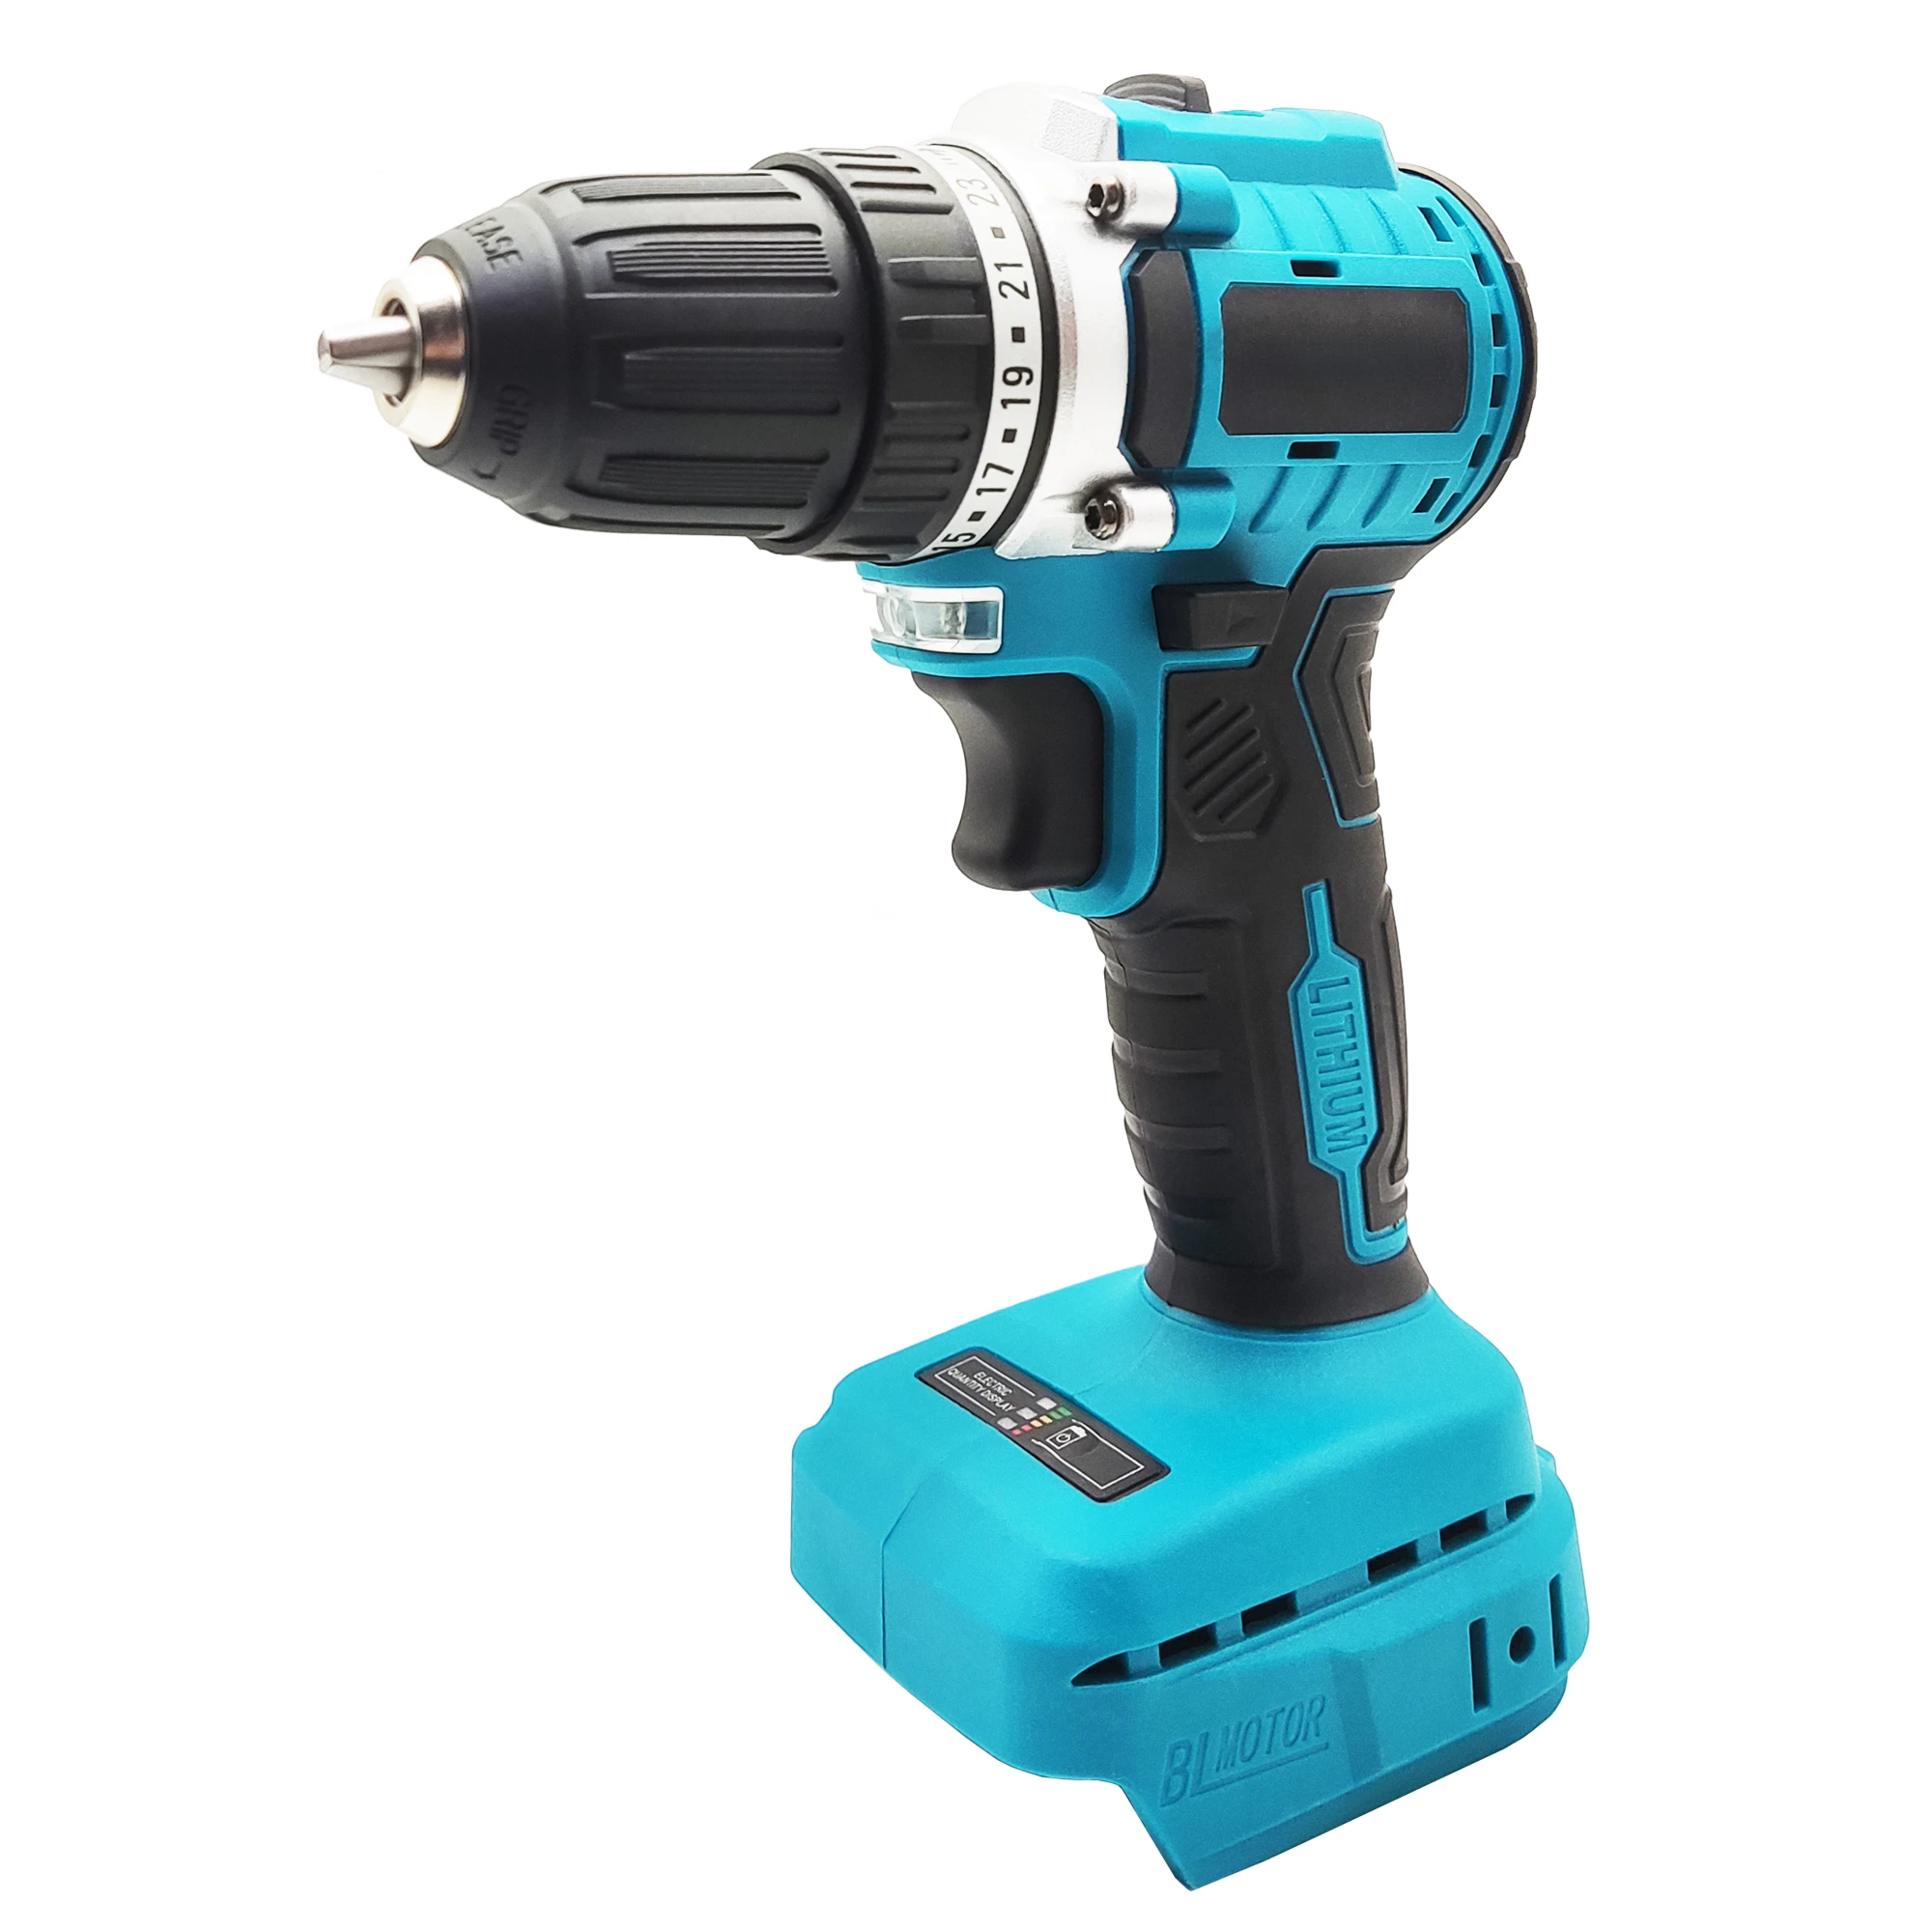 

10mm Cordless Brushless Drill Electric Hand Drill Screwdriver 2 Speed 23 Torque Setting fit Makita 18v Battery (No Battery)